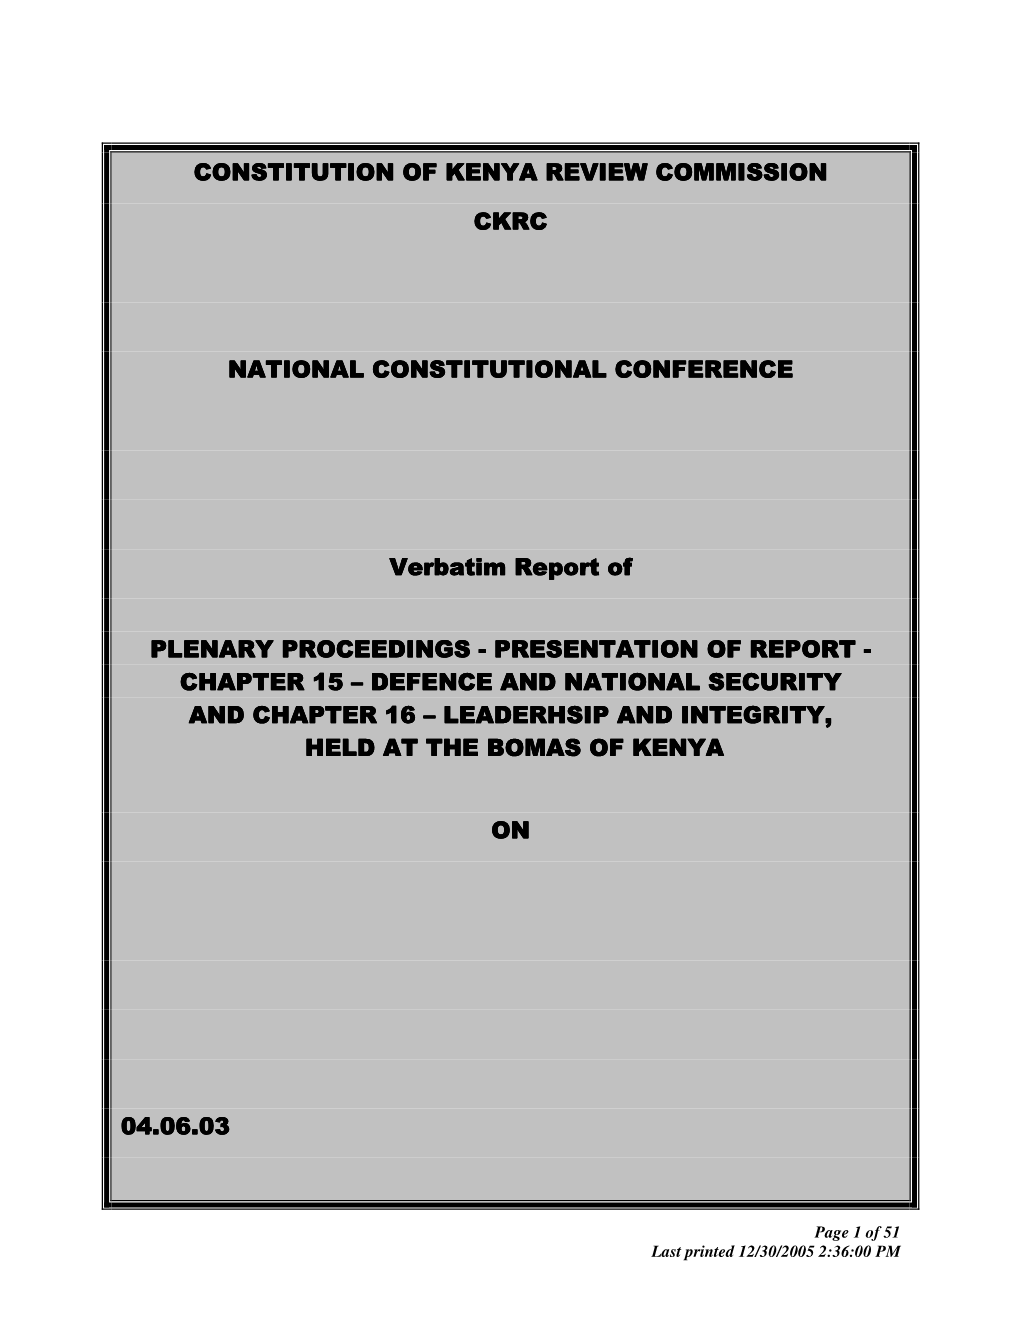 Constitution of Kenya Review Commission Constitution Of